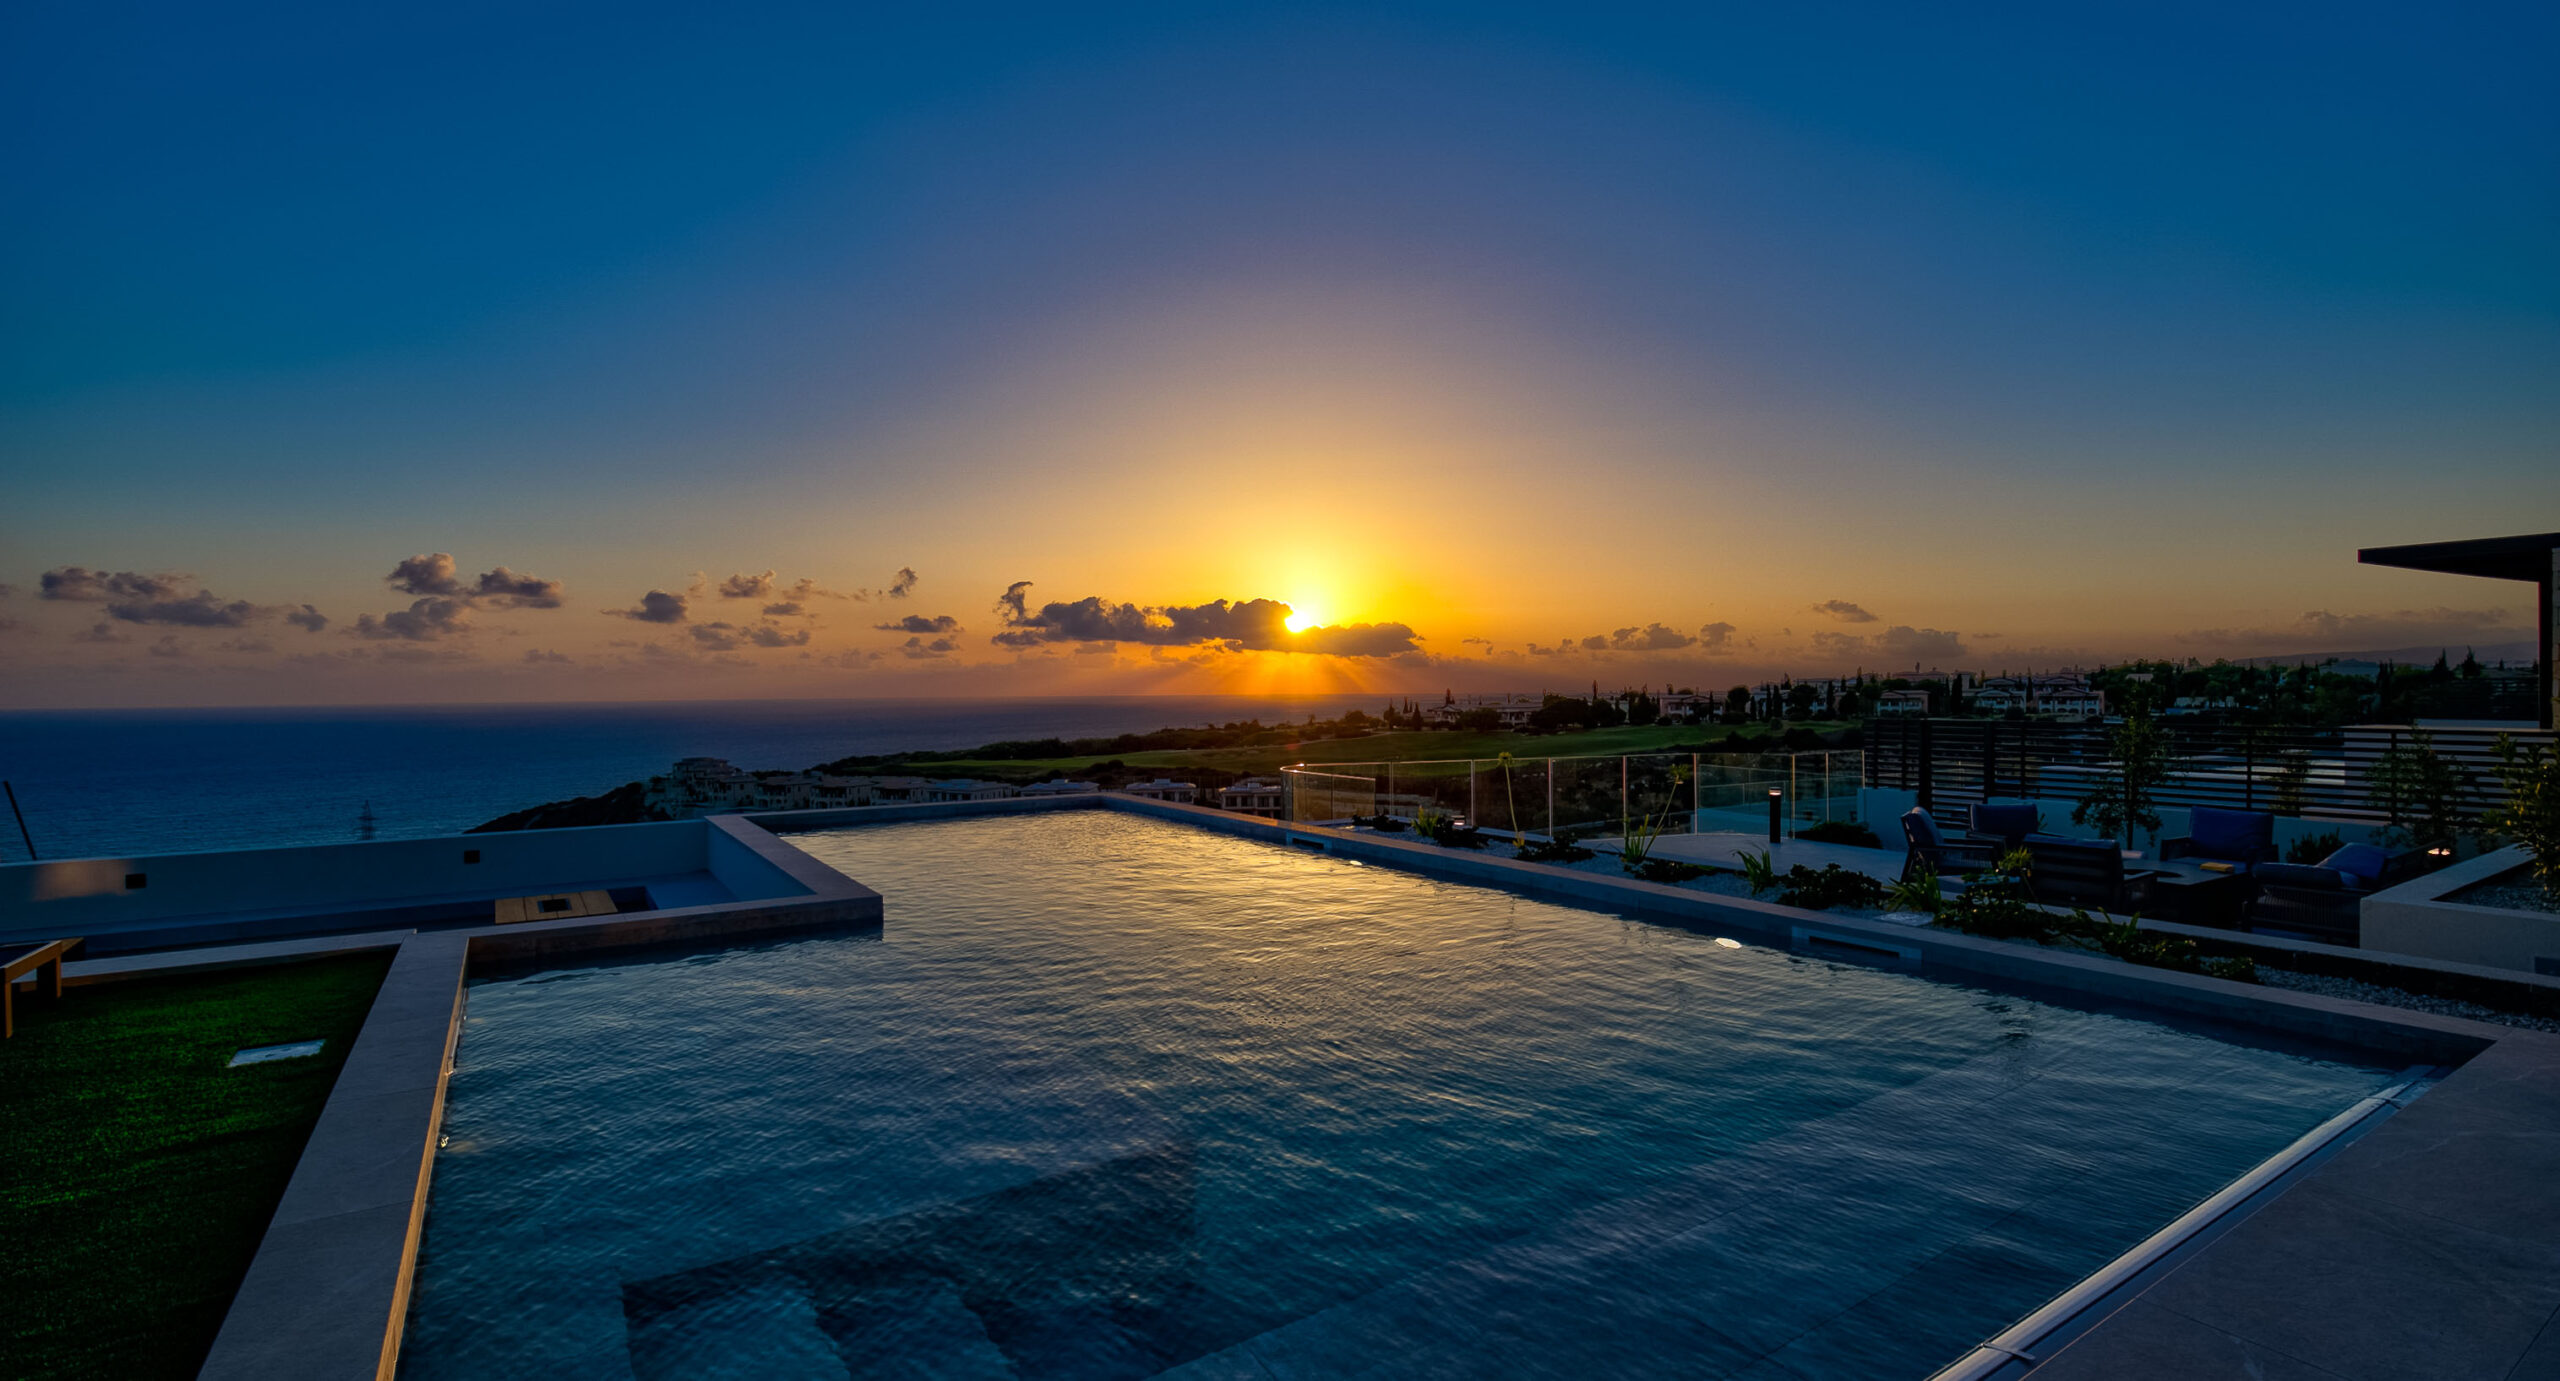 Photo of Villa 286 on Aphrodite Hills - Pool looking out to sea with sunset in the background